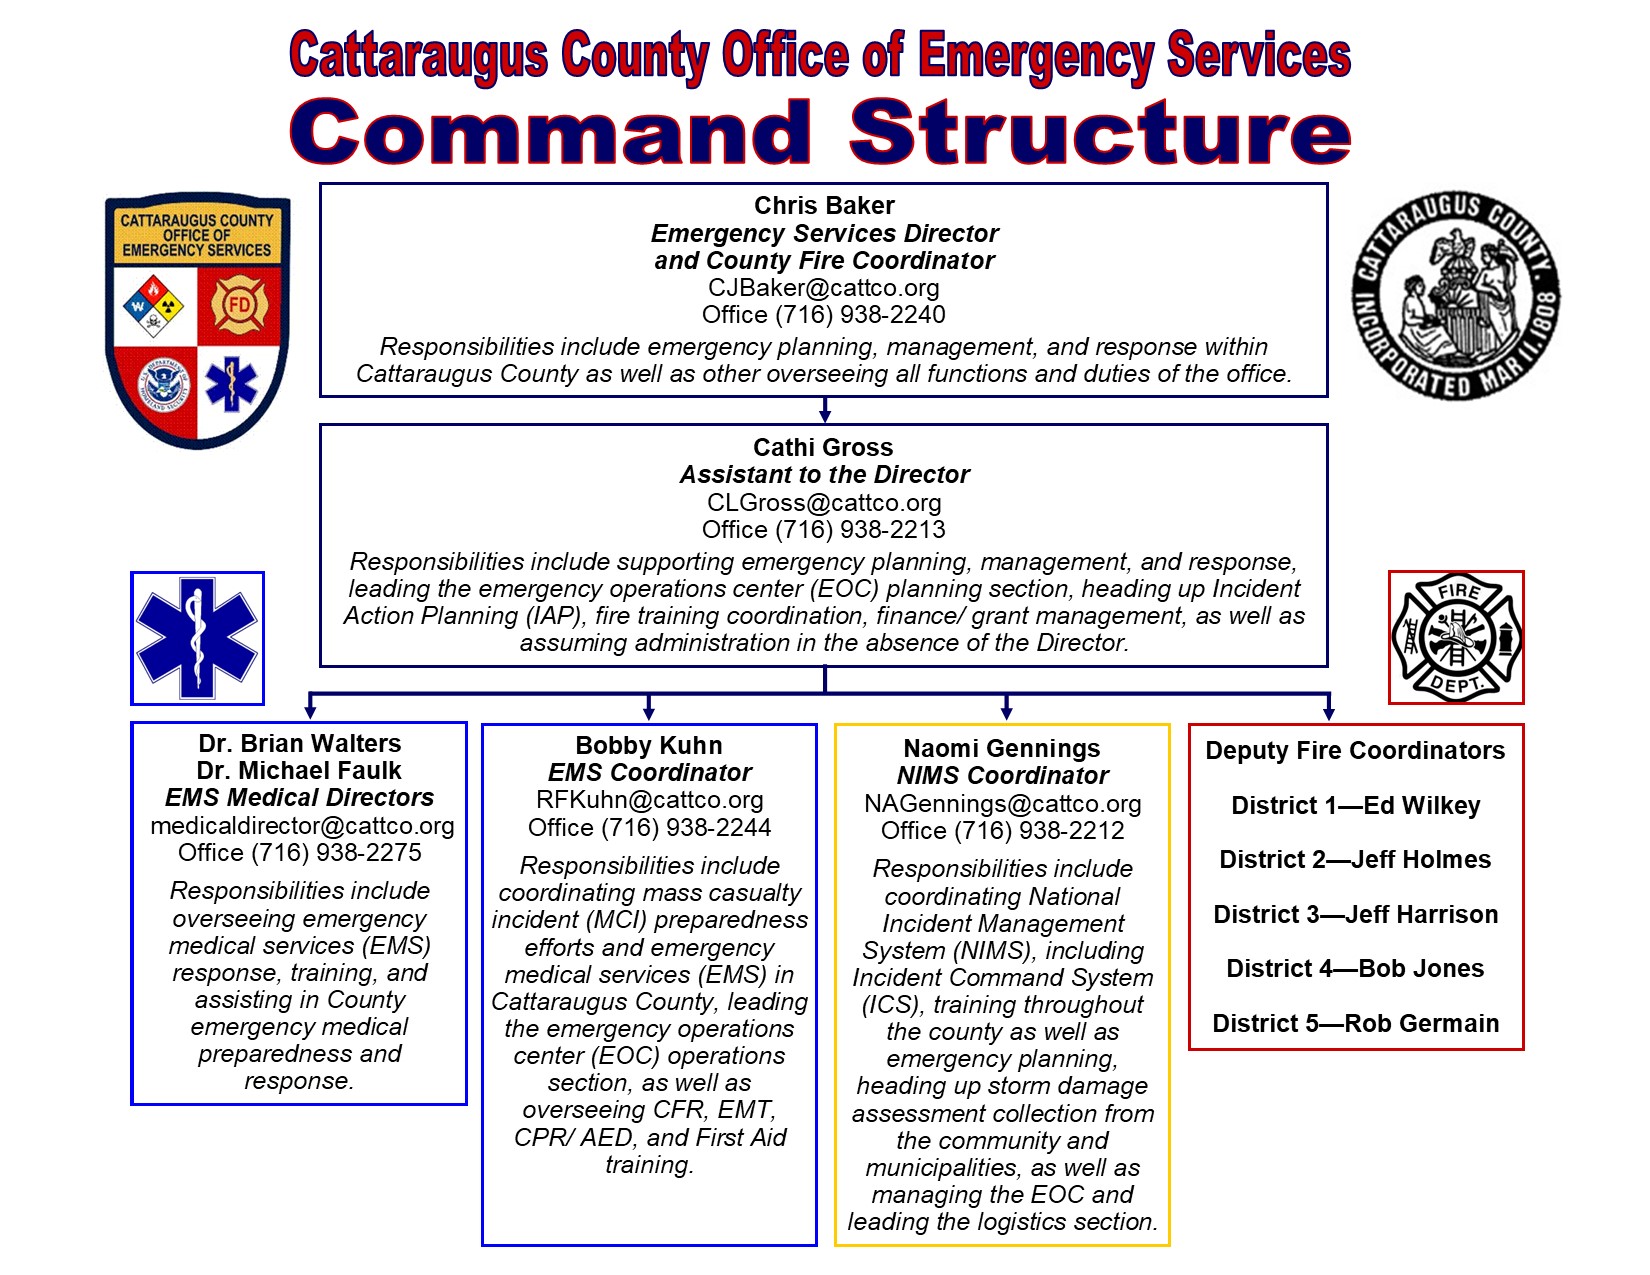 CCOES%20Command%20Structure%201.2023.jpg